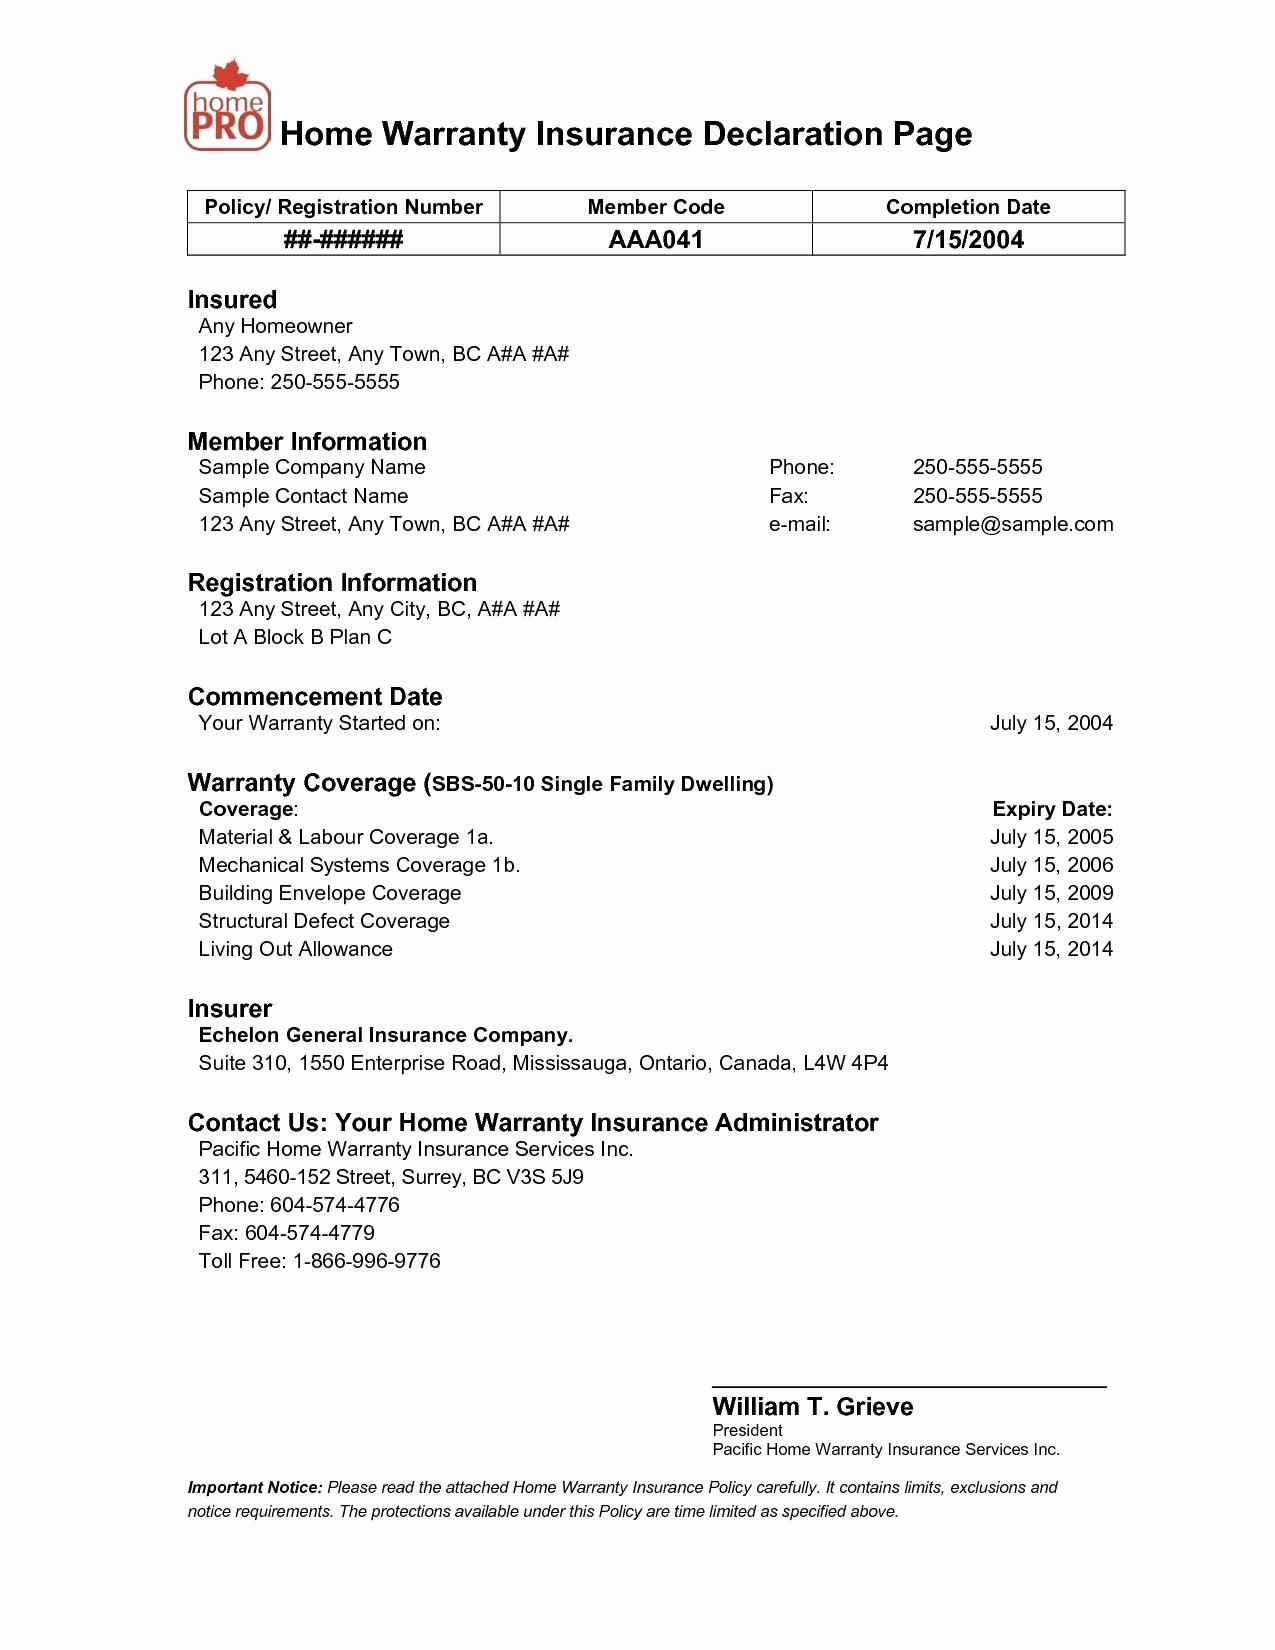 Auto Insurance Declaration Page Sample Lovely Car Document Homeowners